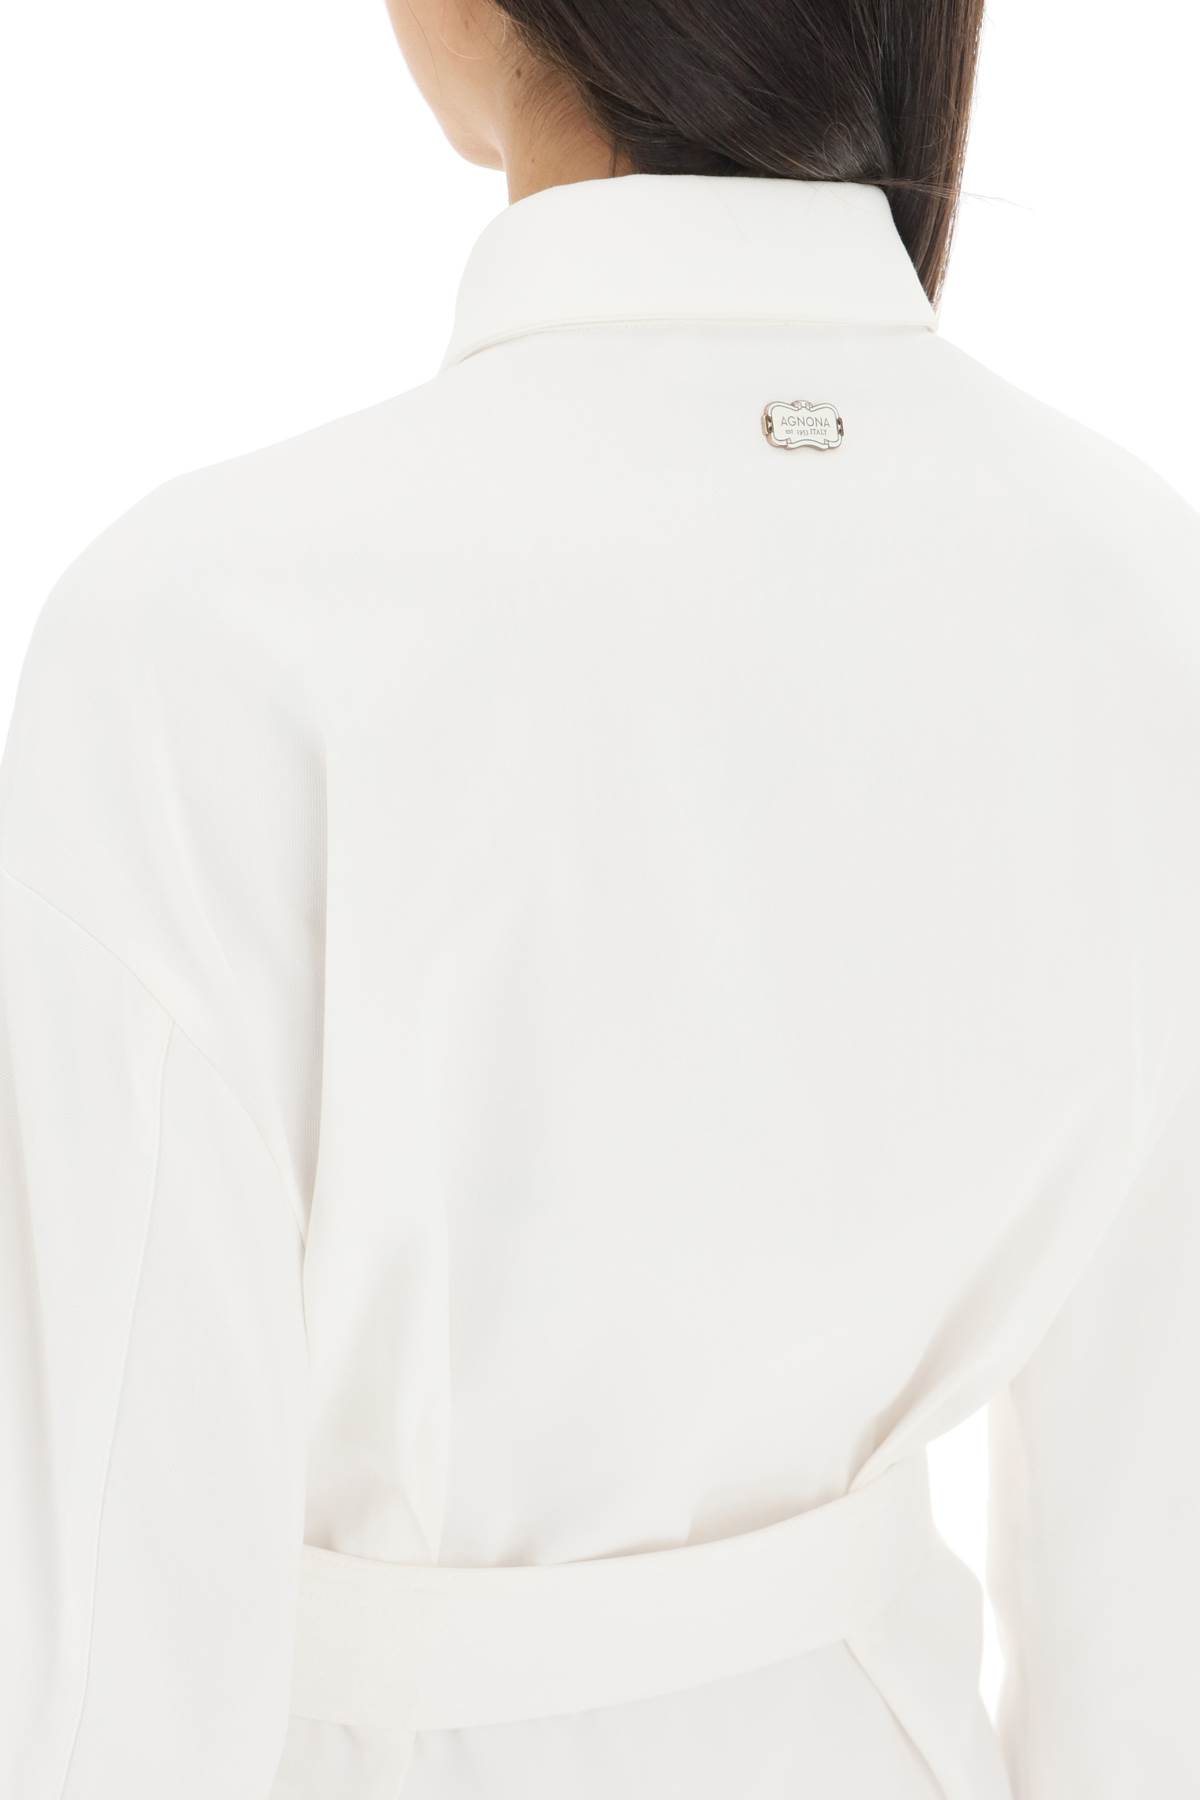 Shop Agnona Belted Twill Shirt Dress In White (white)